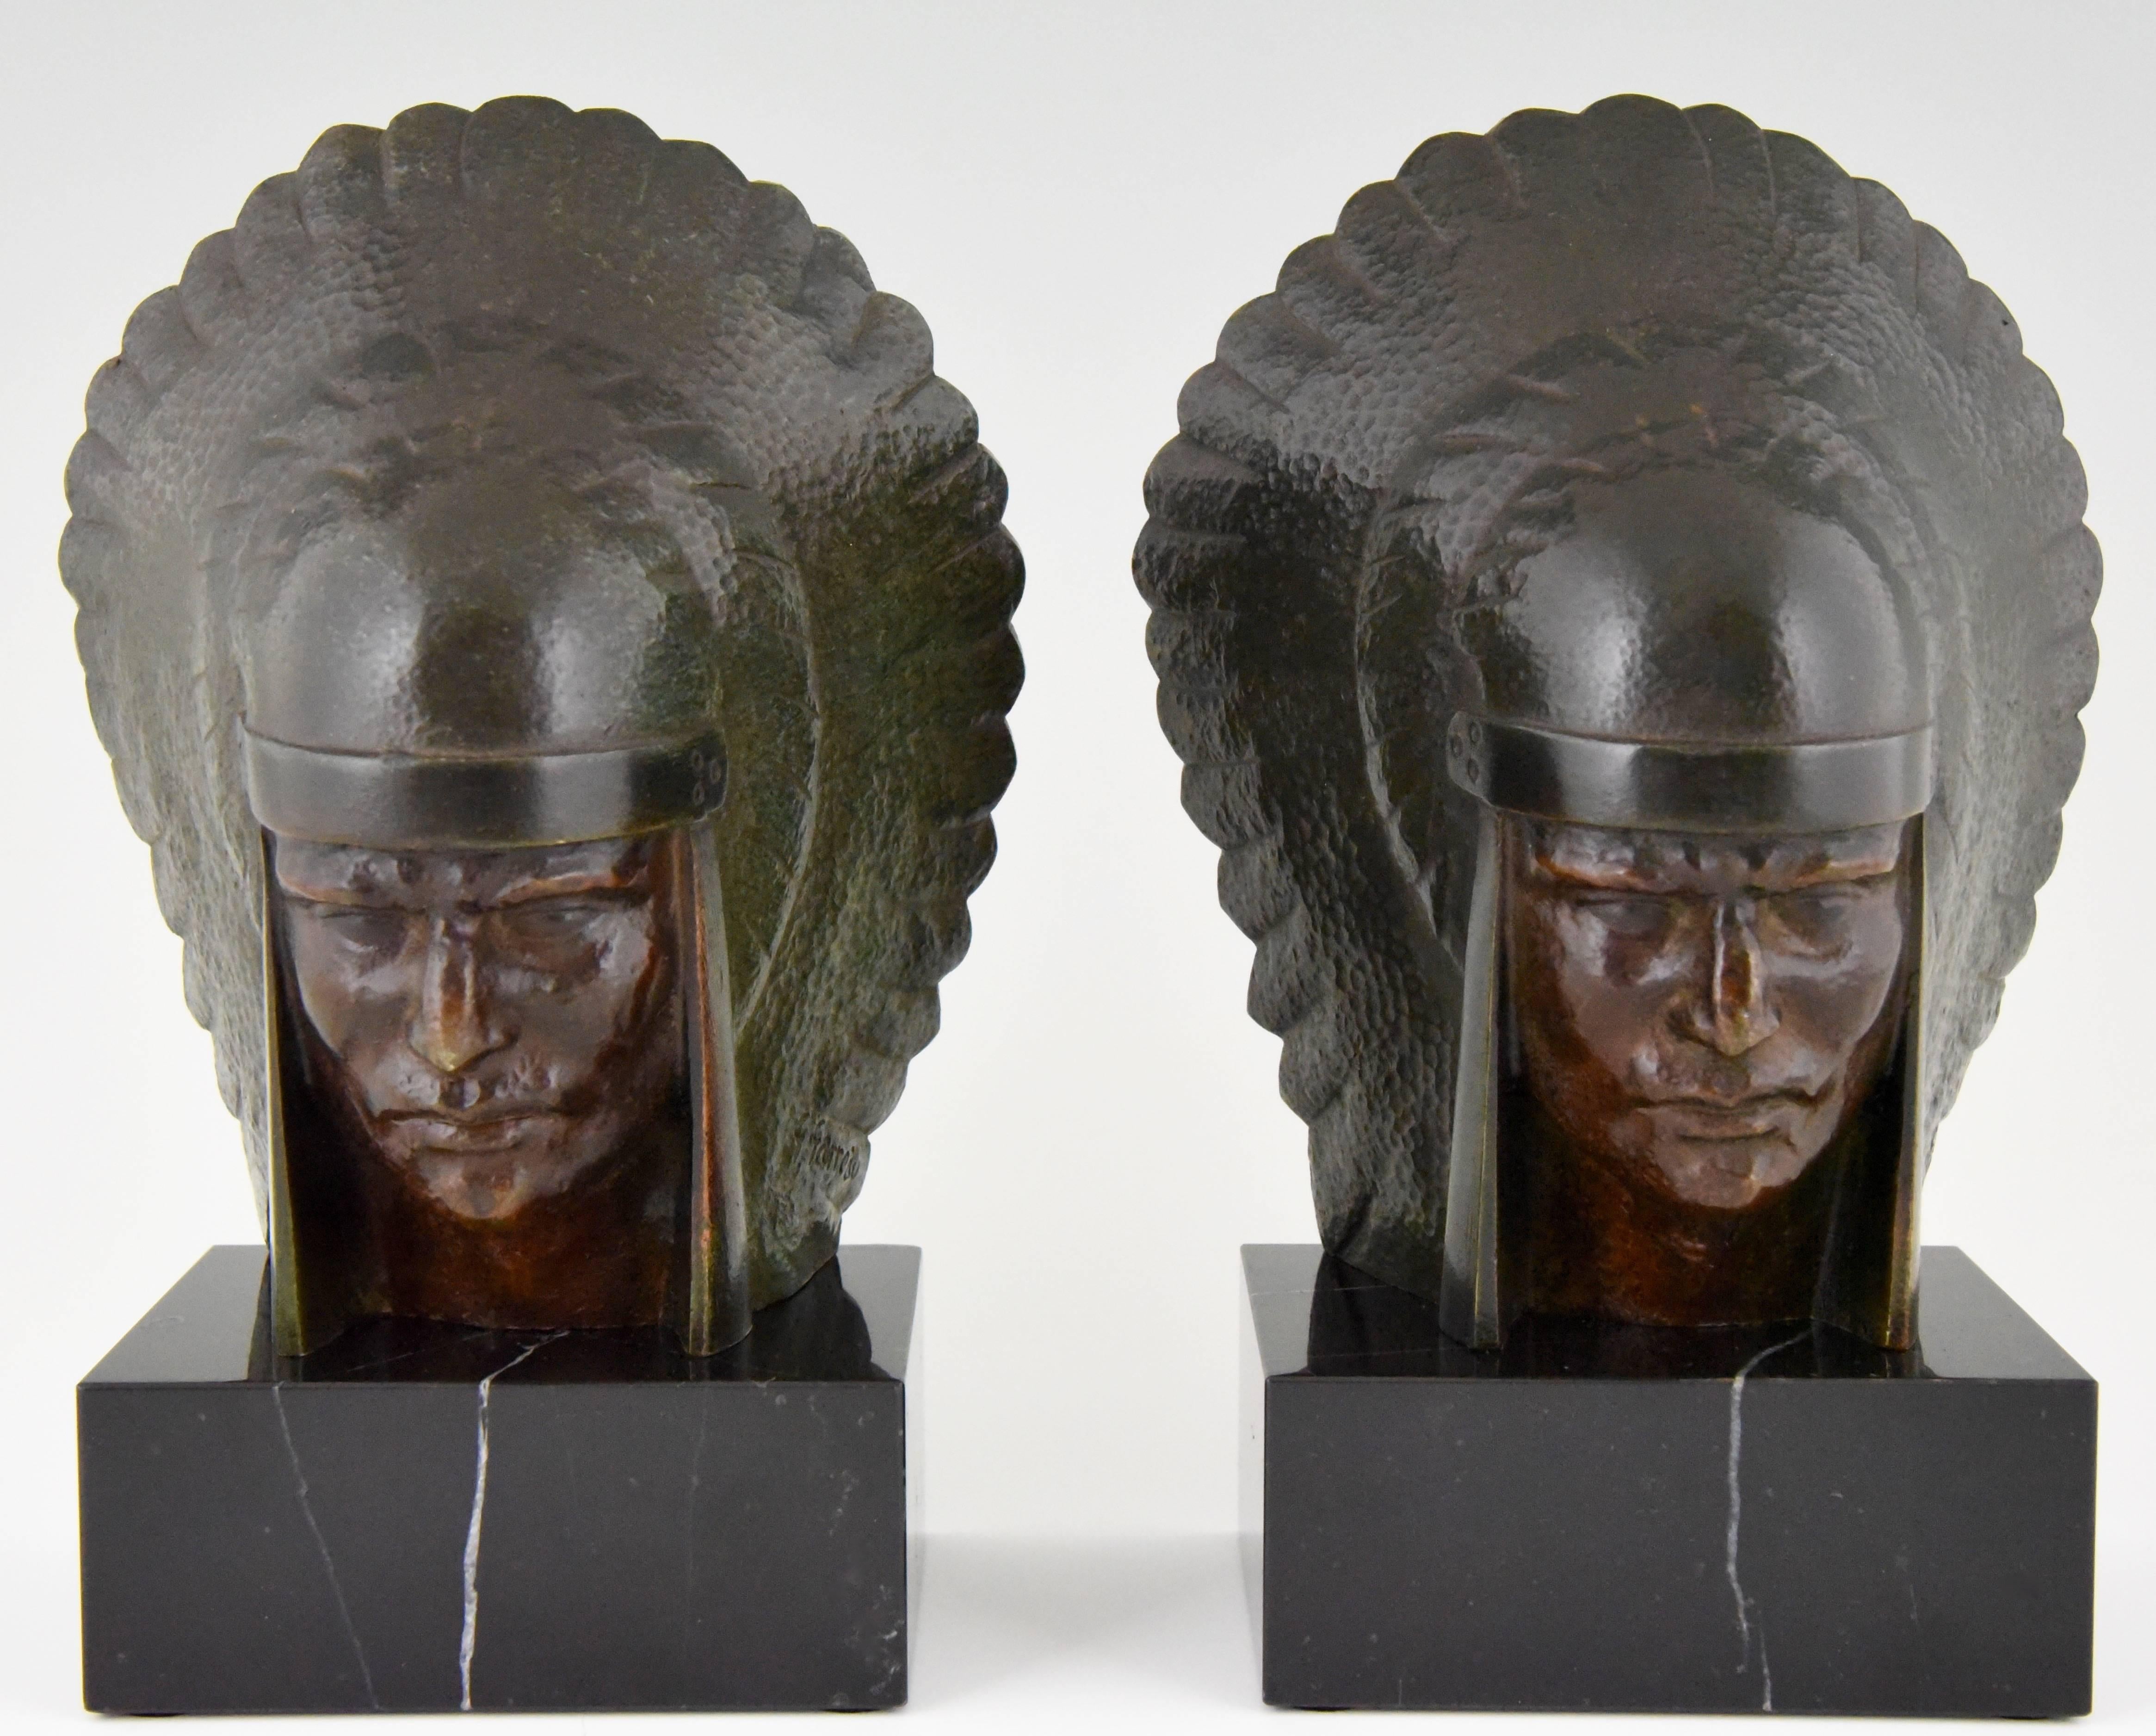 Beautiful pair of Art Deco bronze bookends by the French artist Georges Garreau. 

Signature/ Marks: G. Garreau.
Style: Art Deco
Date: 1930
Material: Multi color patinated bronze. Black marble base.
Origin: France
Size: H. 19.5 cm x L. 13 cm.